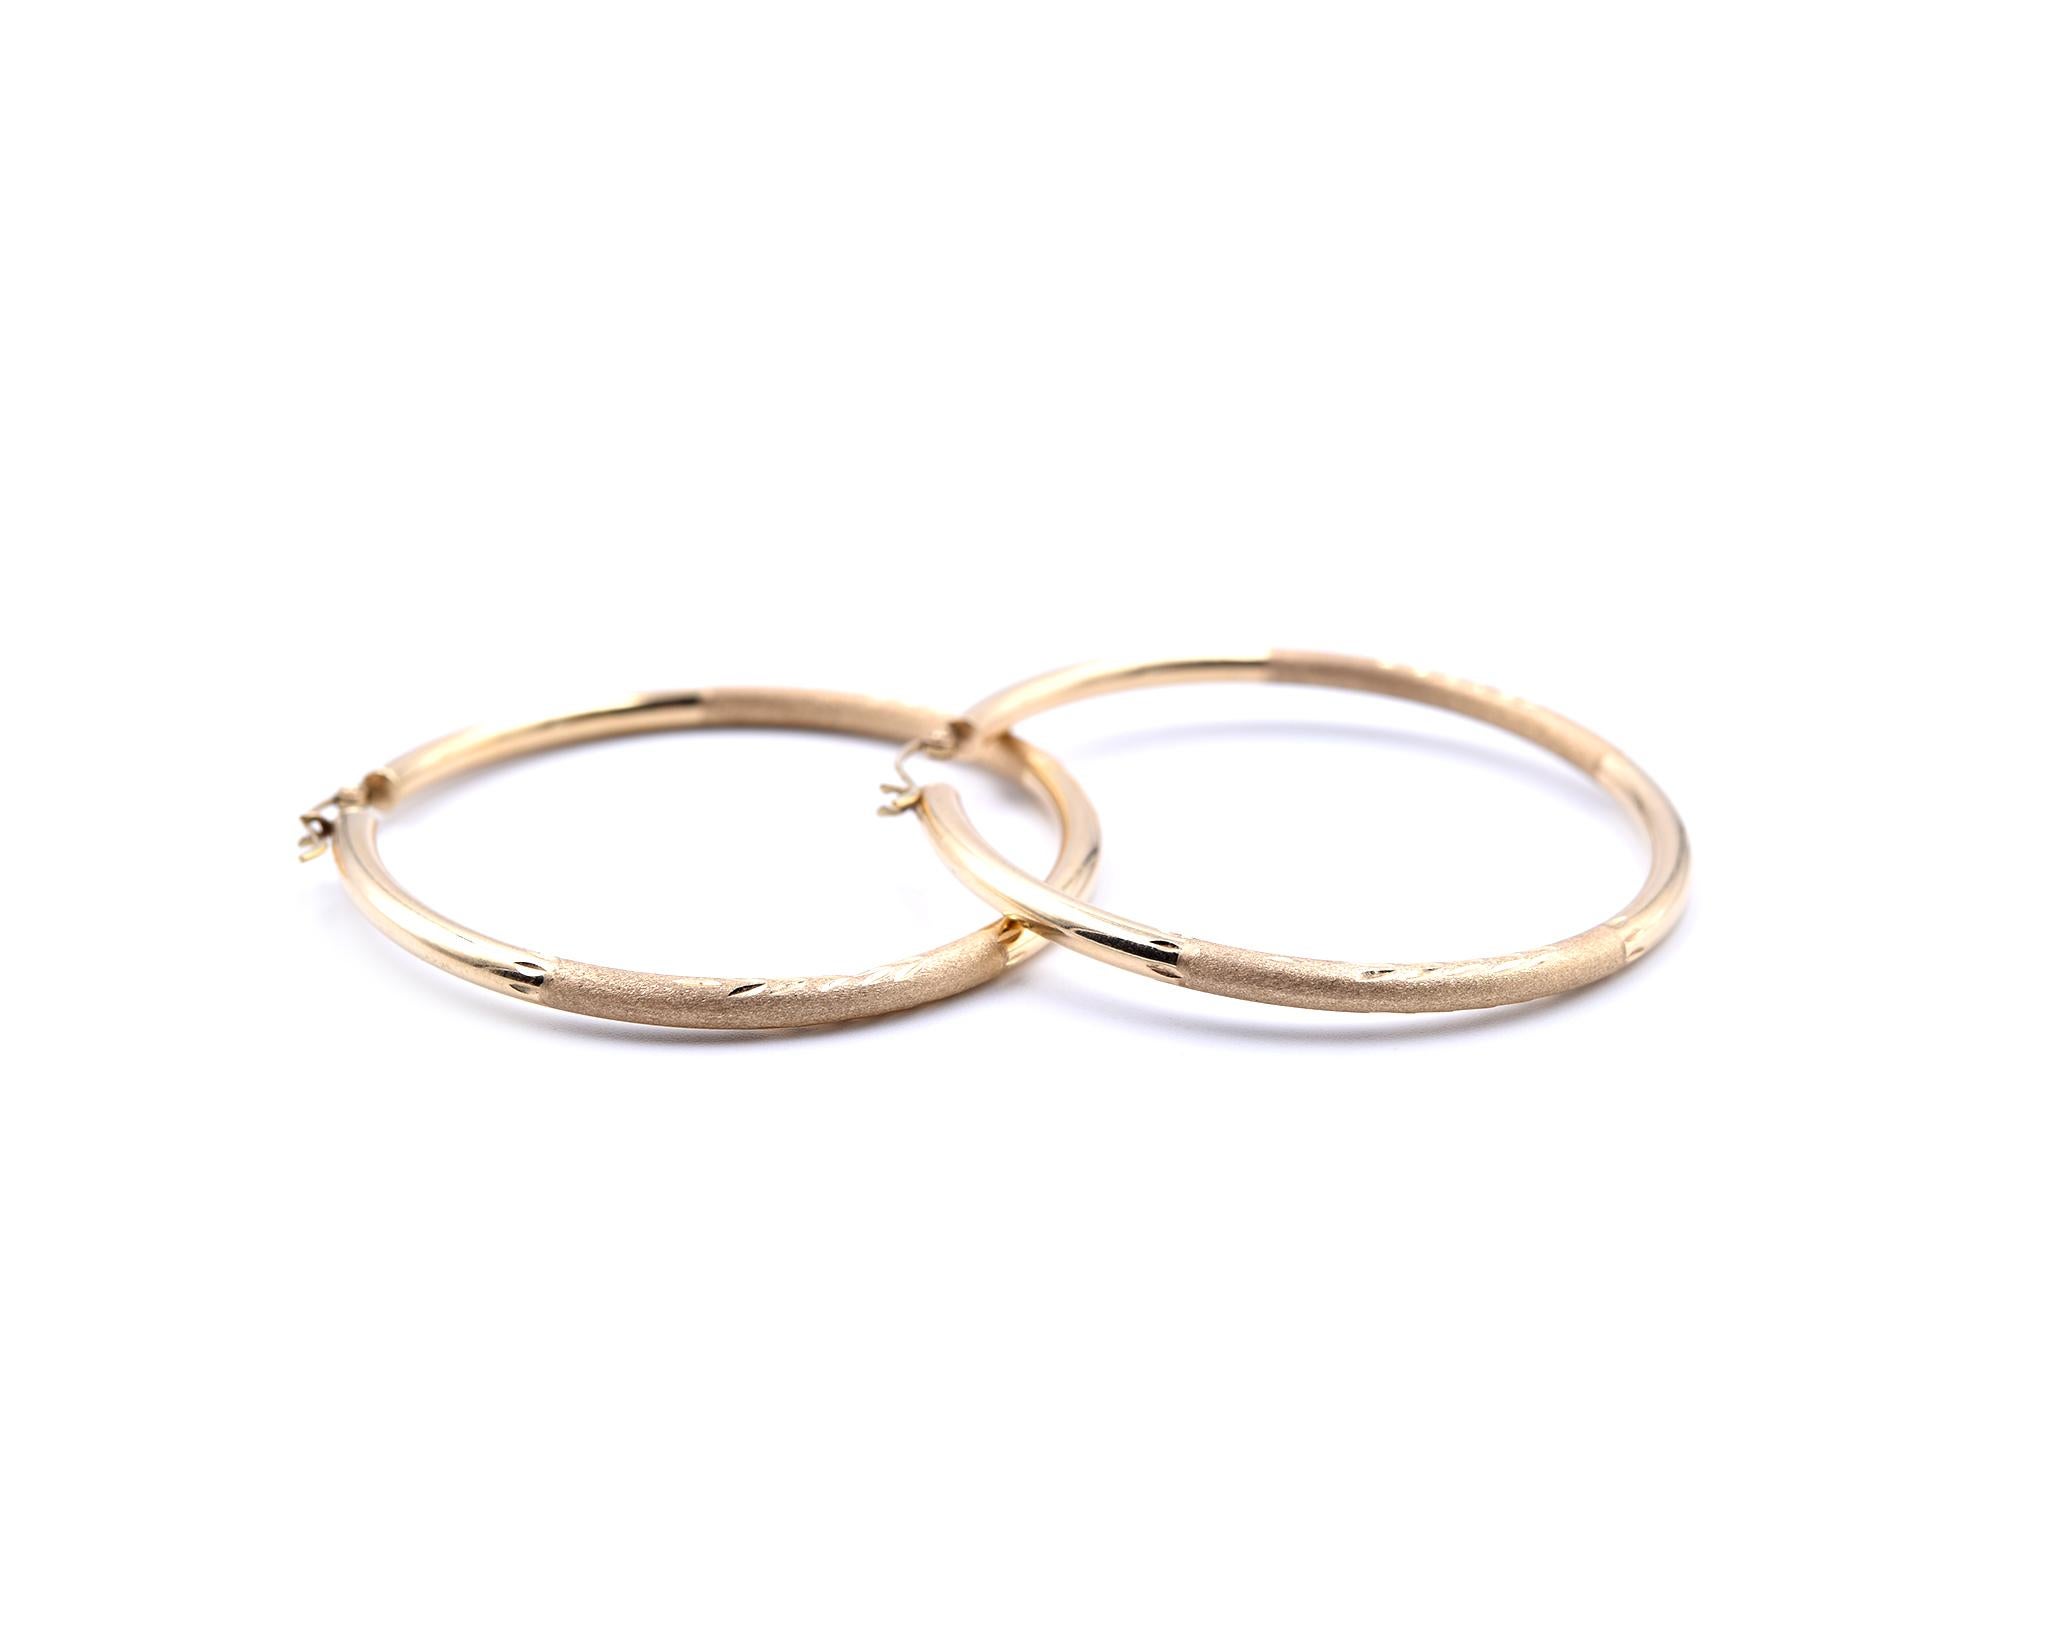 Designer: custom design
Material: 14k yellow gold  
Dimensions: earrings measure 50mm in diameter and are 3mm wide
Fastenings: post with saddle backs
Weight: 4.07 grams
